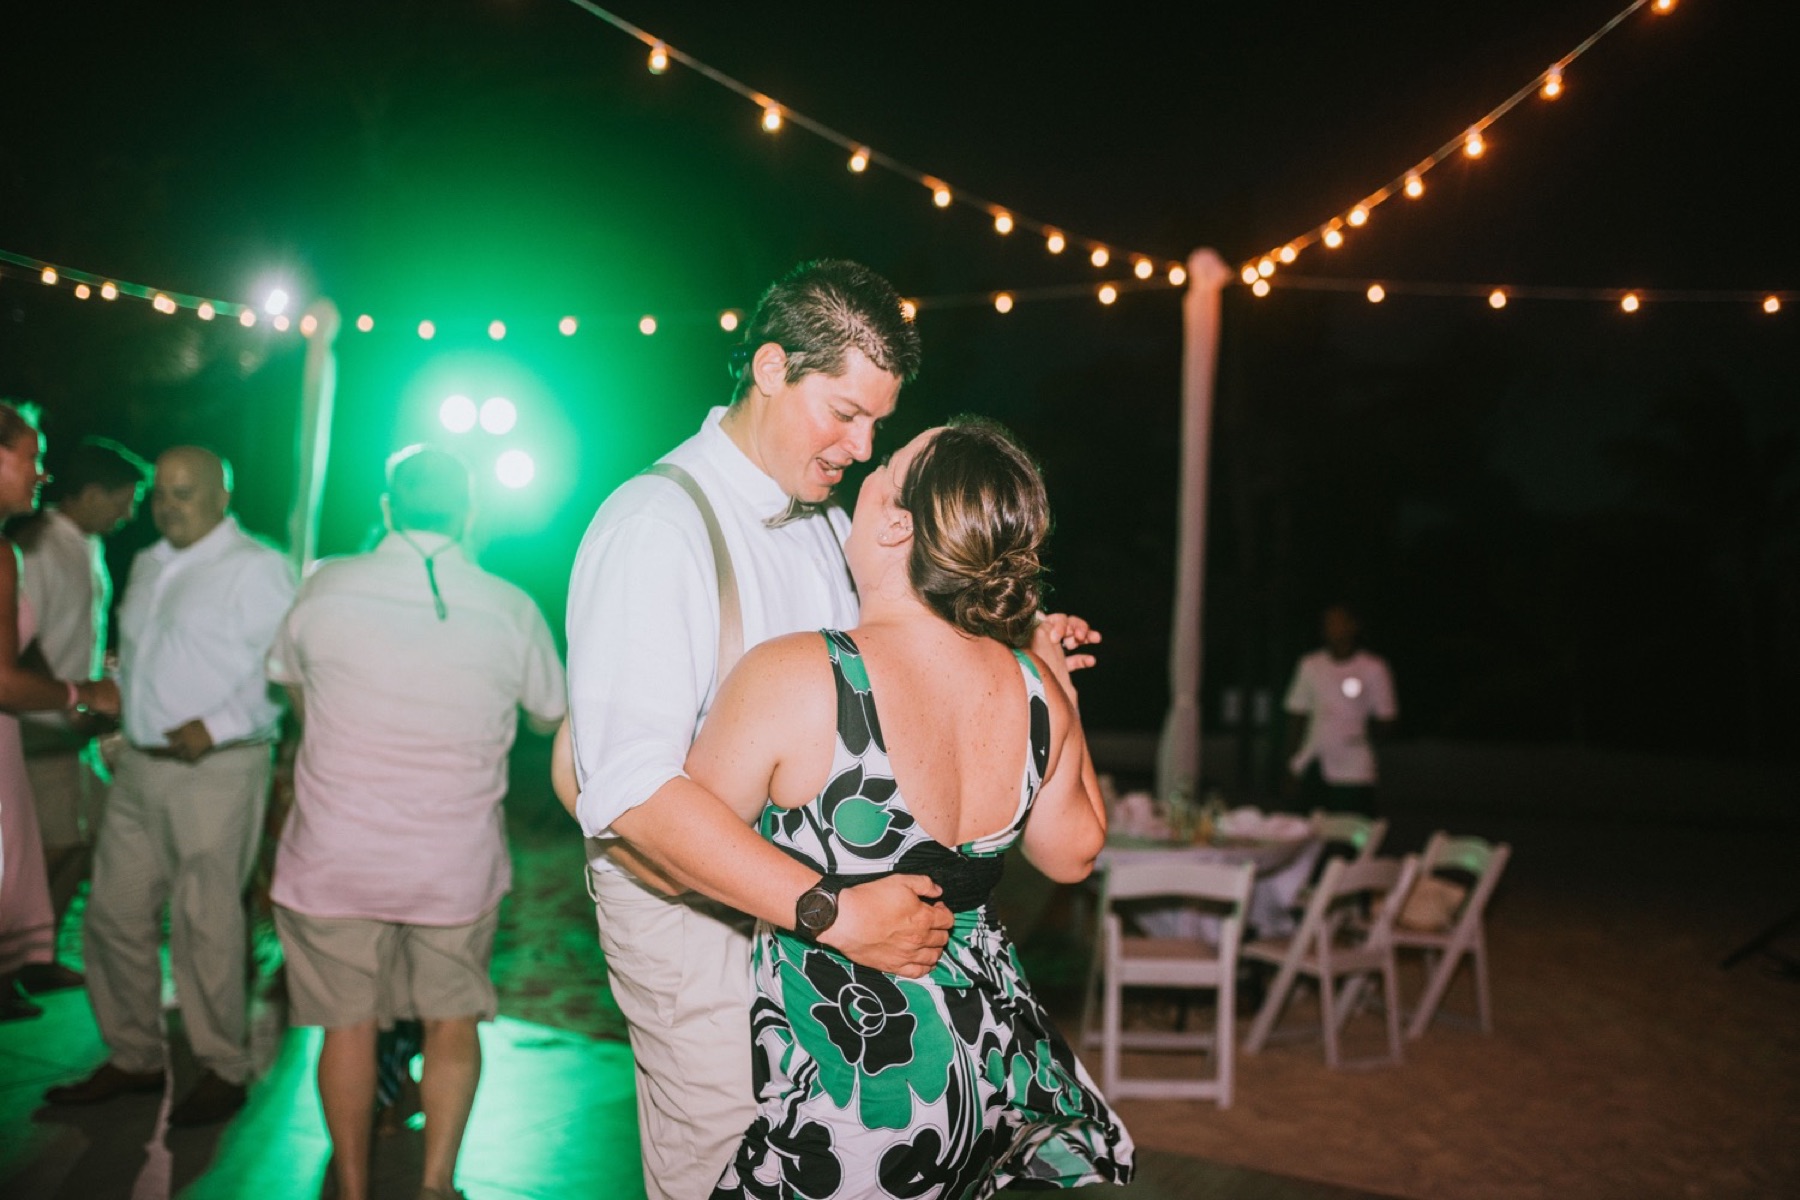 Best man dancing with wife at wedding